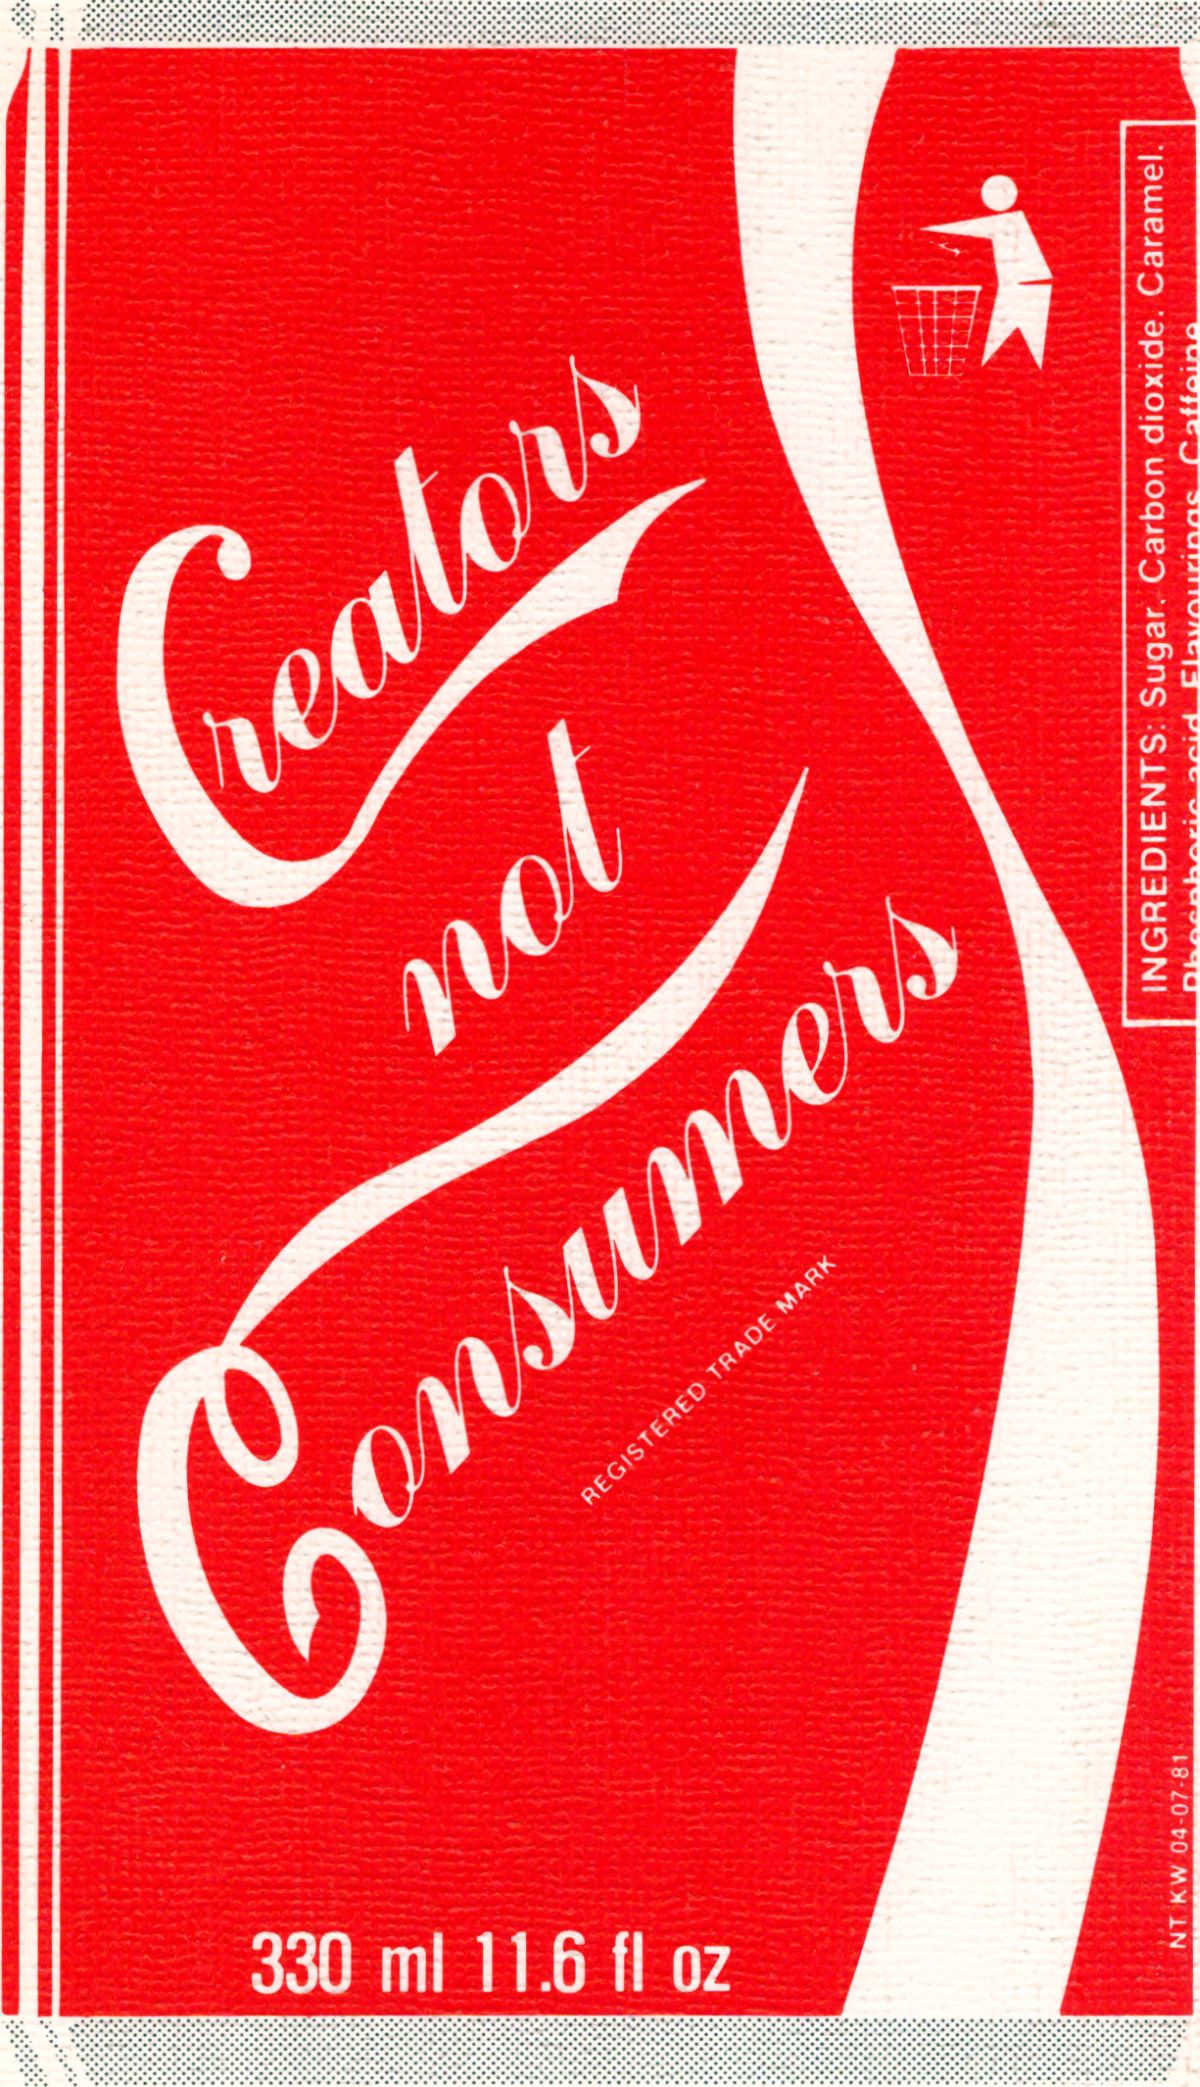 Creators not Consumers - cover of second edition